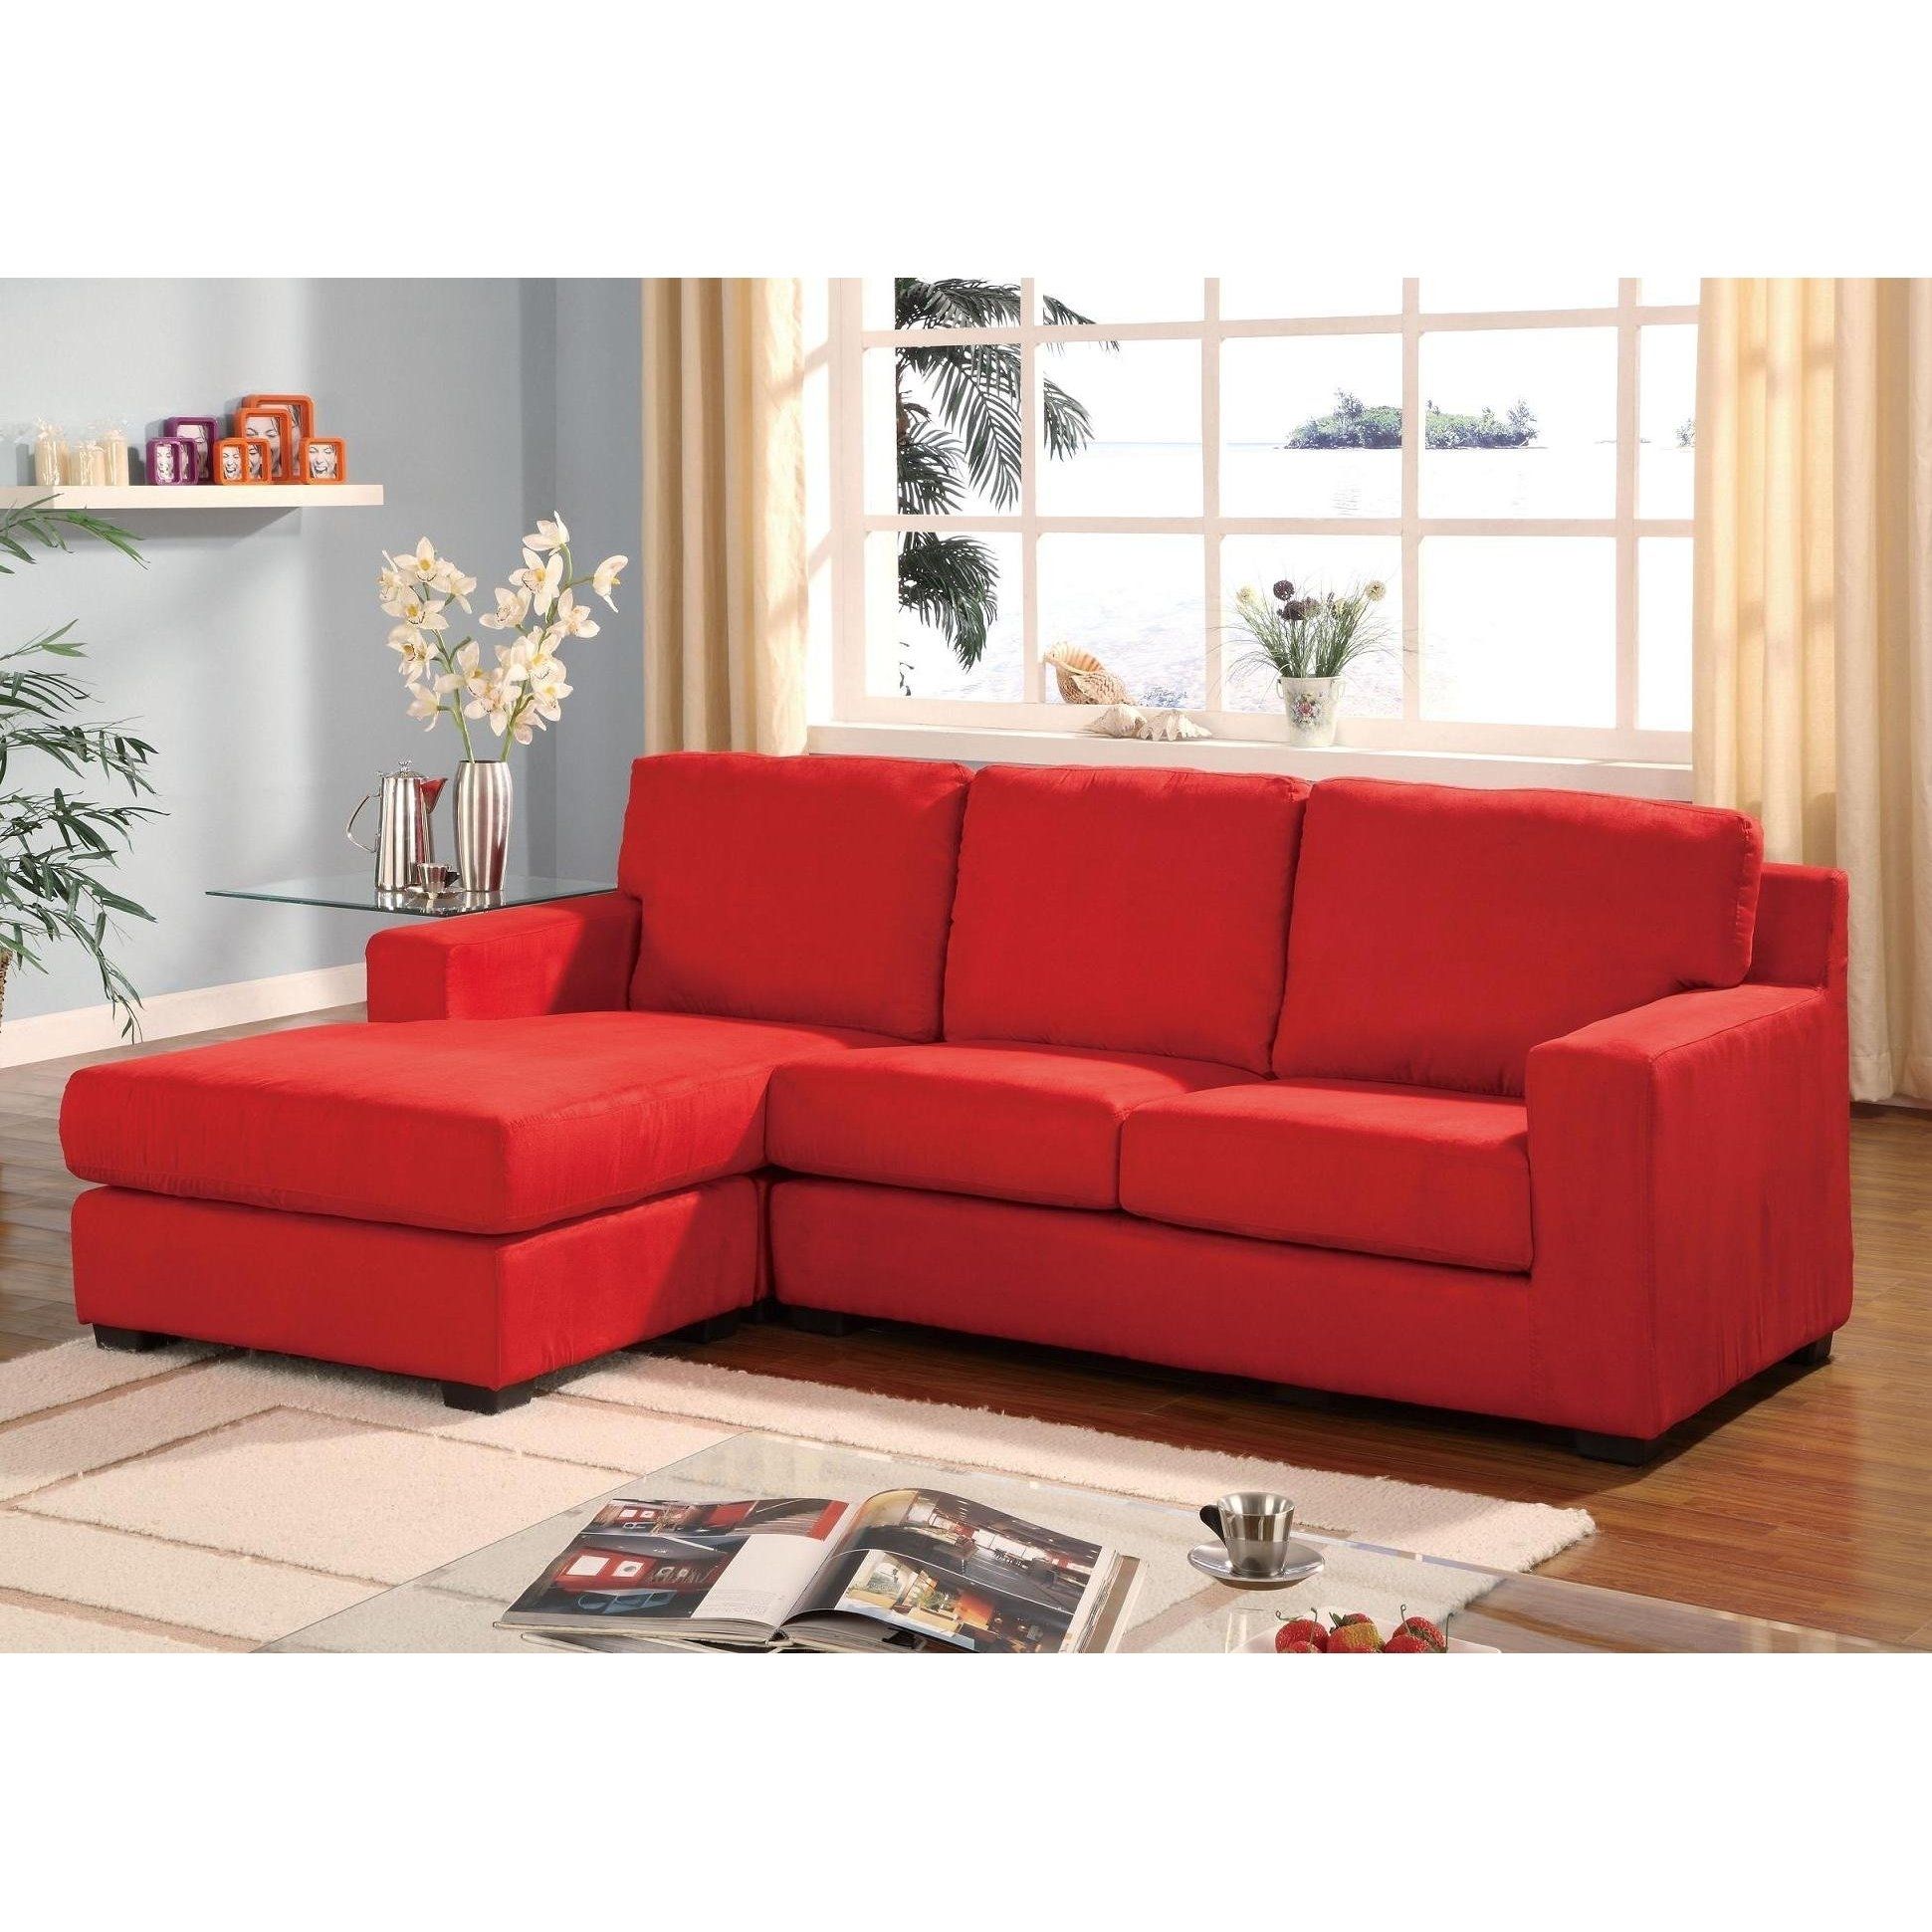 Sofas Red Sectional Sofa Reclining Sectional Sofas For Small Inside Red Leather Sectionals With Chaise 